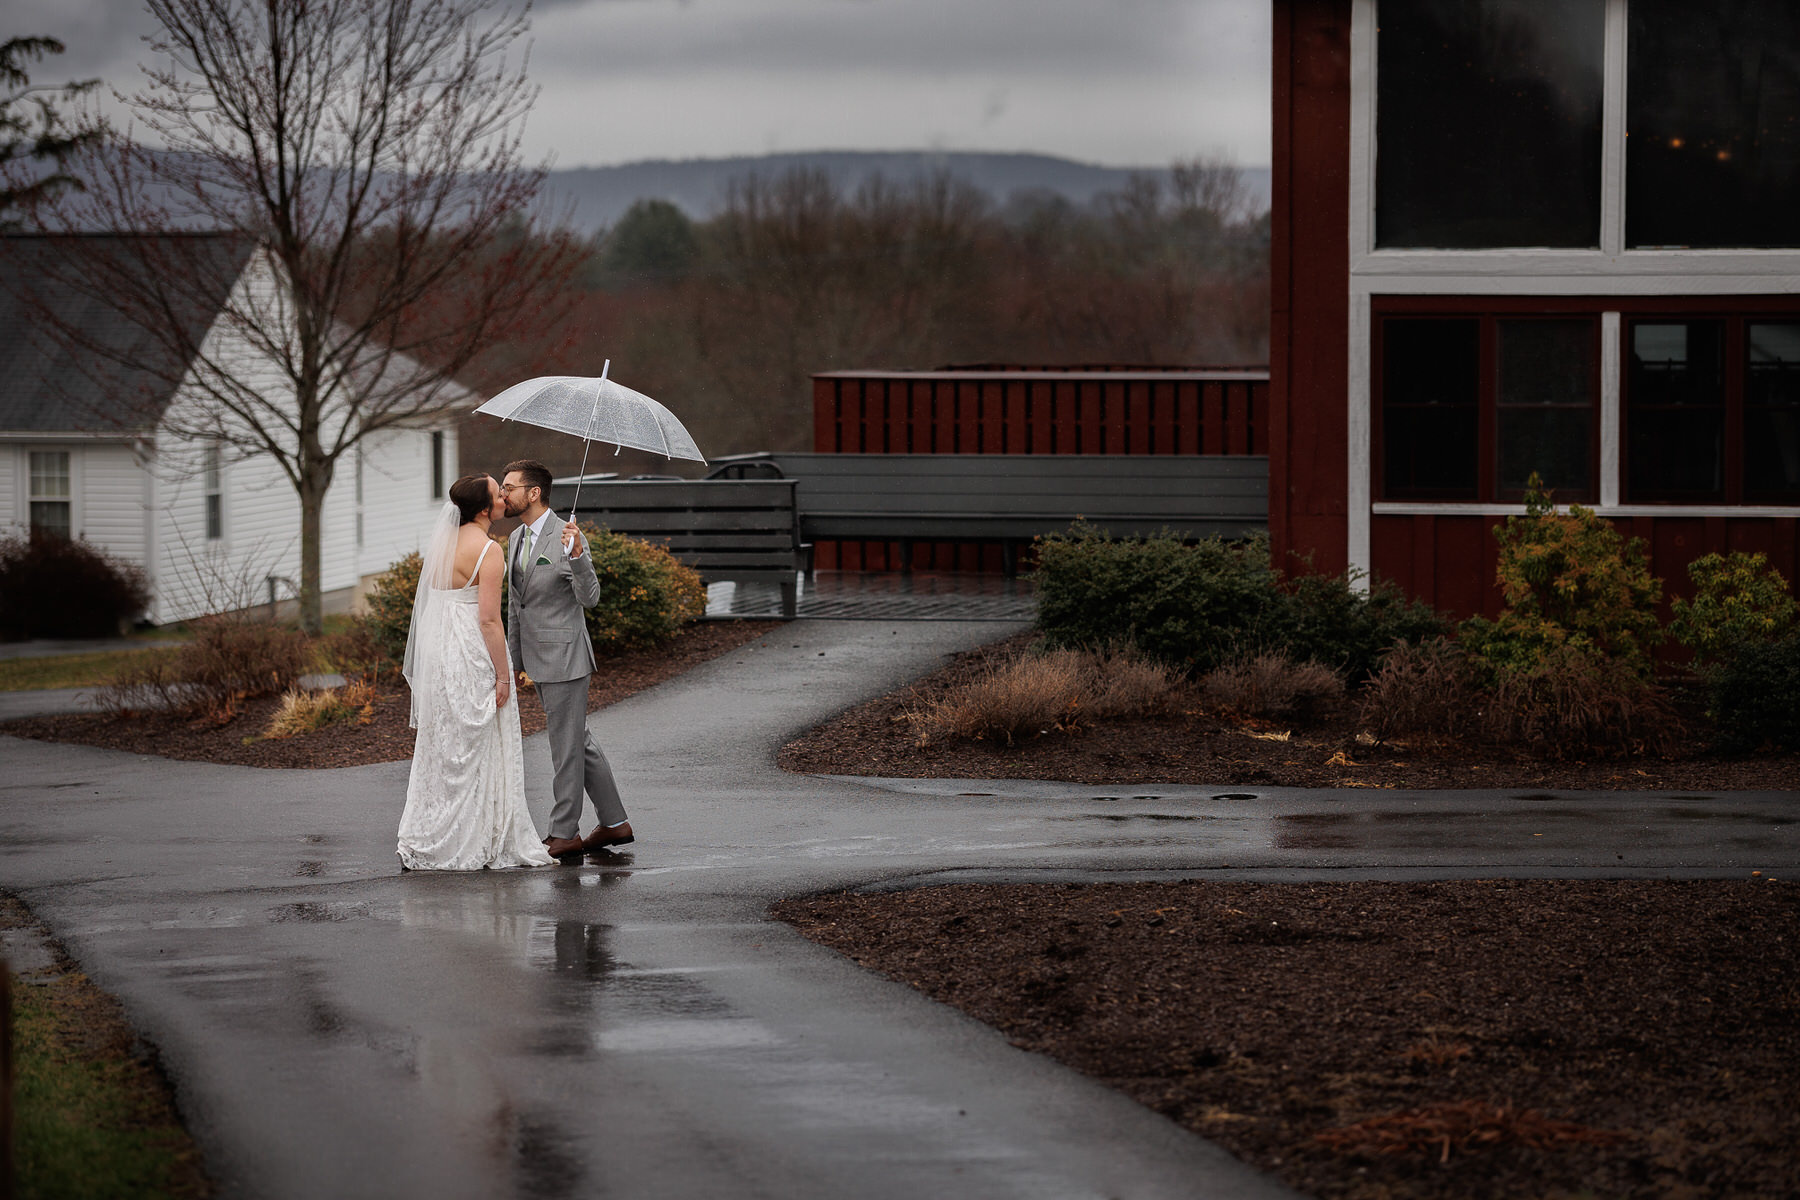 Red Barn photo with wedding couple in the rain with umbrellas